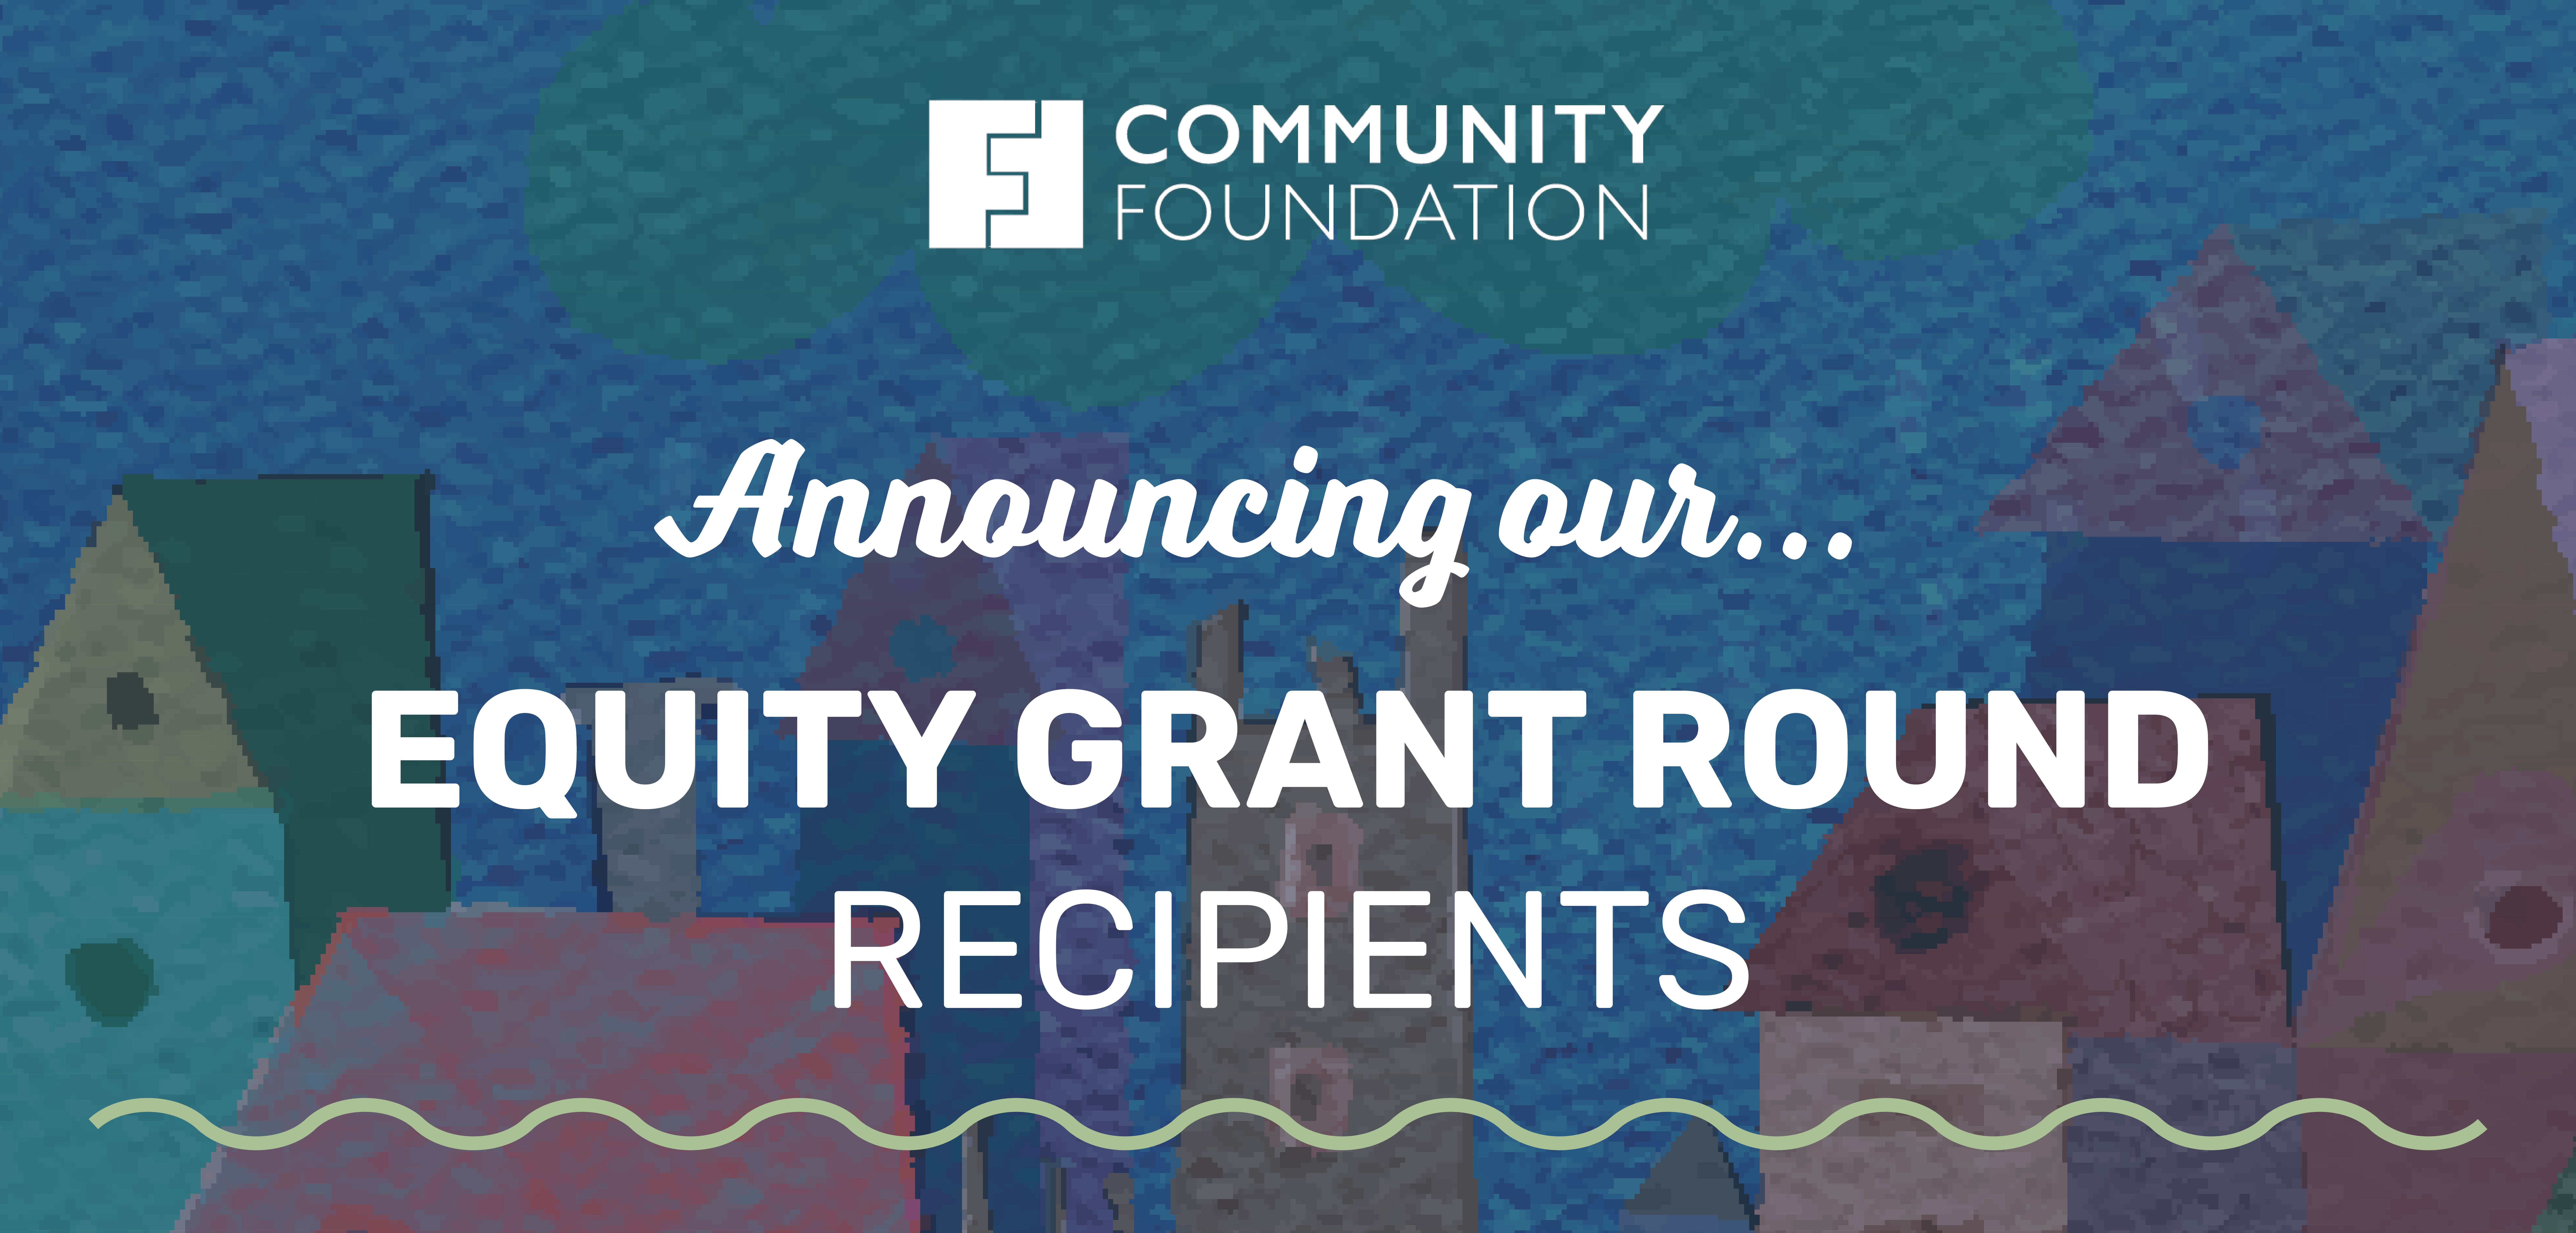 Community Foundation Awards More Than $165,000 in Equity Grants